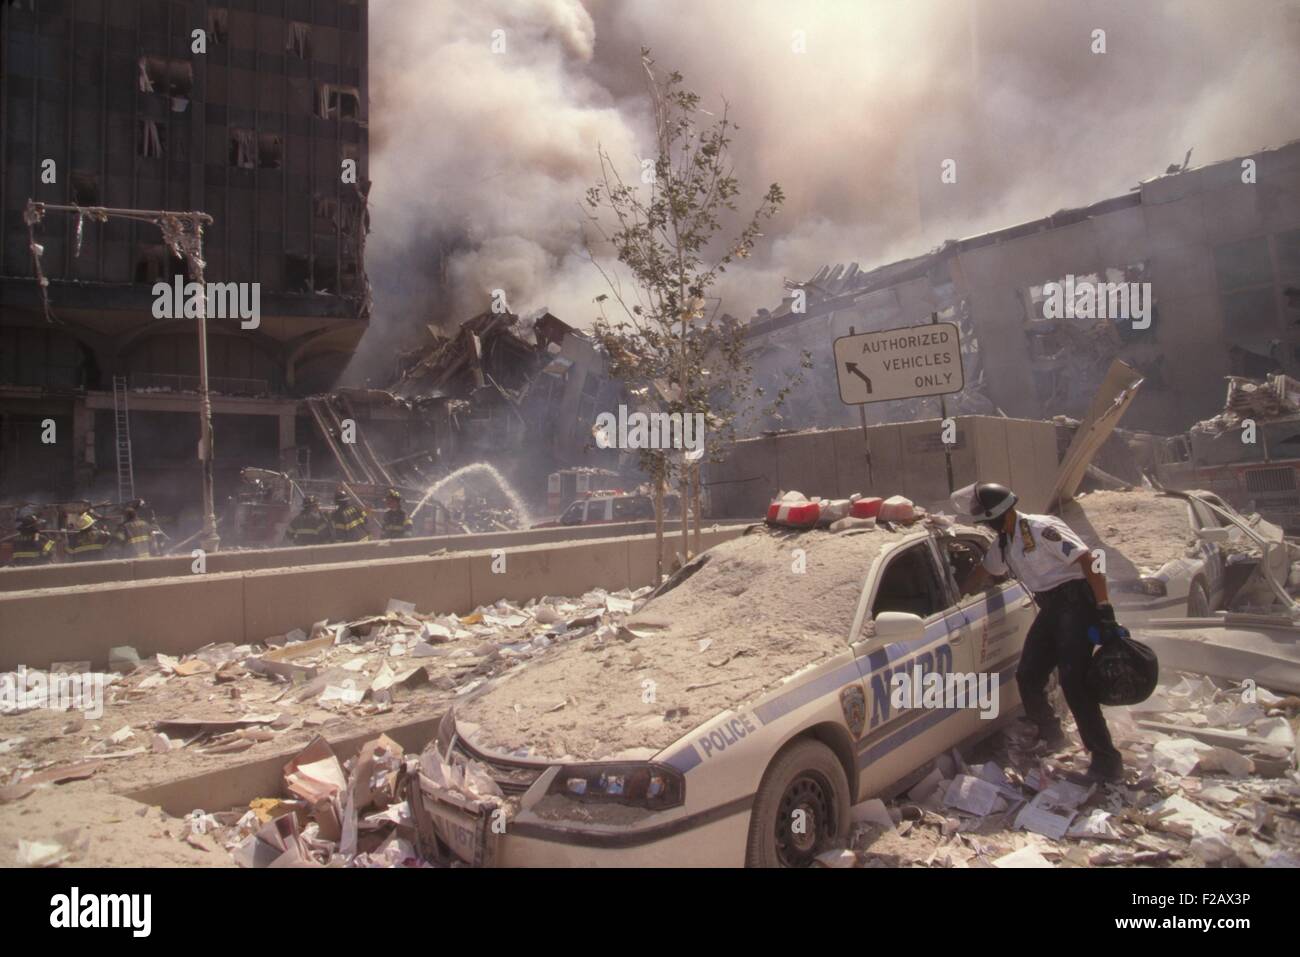 Policeman reaching into a debris covered police car after 9-11 terrorist attack in NYC. At left is still standing WTC 6. At right is the destroyed North pedestrian bridge over West Side Highway (West St.). In the background is the burning pile of the collapsed WTC 1 (North Tower). New York City, Sept. 11, 2001. (BSLOC_2015_2_52) Stock Photo